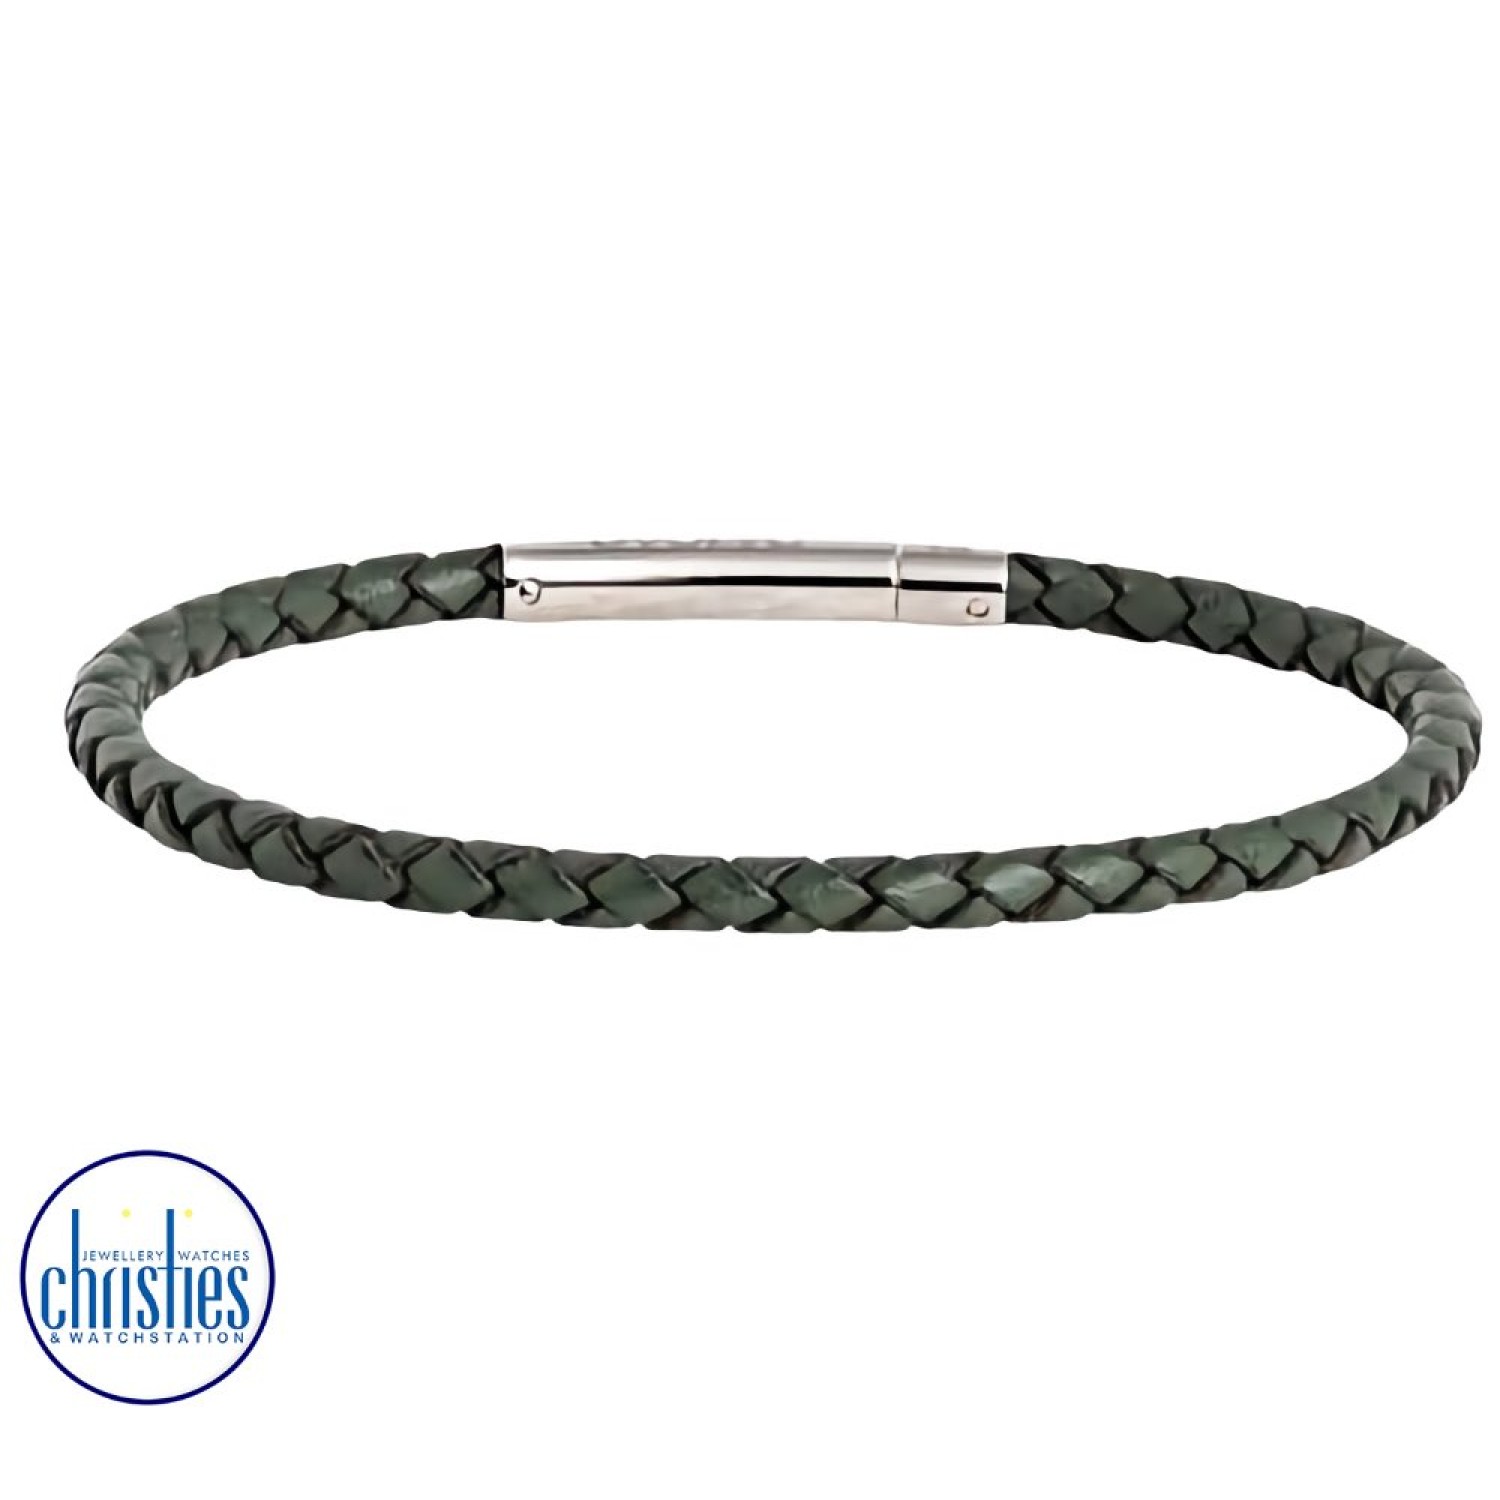 LKBEL-GR19-1 Evolve Jewellery Forest Journey Bracelet. Evolve's Journey bracelets are designed as an everyday companion for life’s journey.The beautiful interlinked pattern reminds us of woven flax (harakeke), a stylish & meaningful part of Māori cul